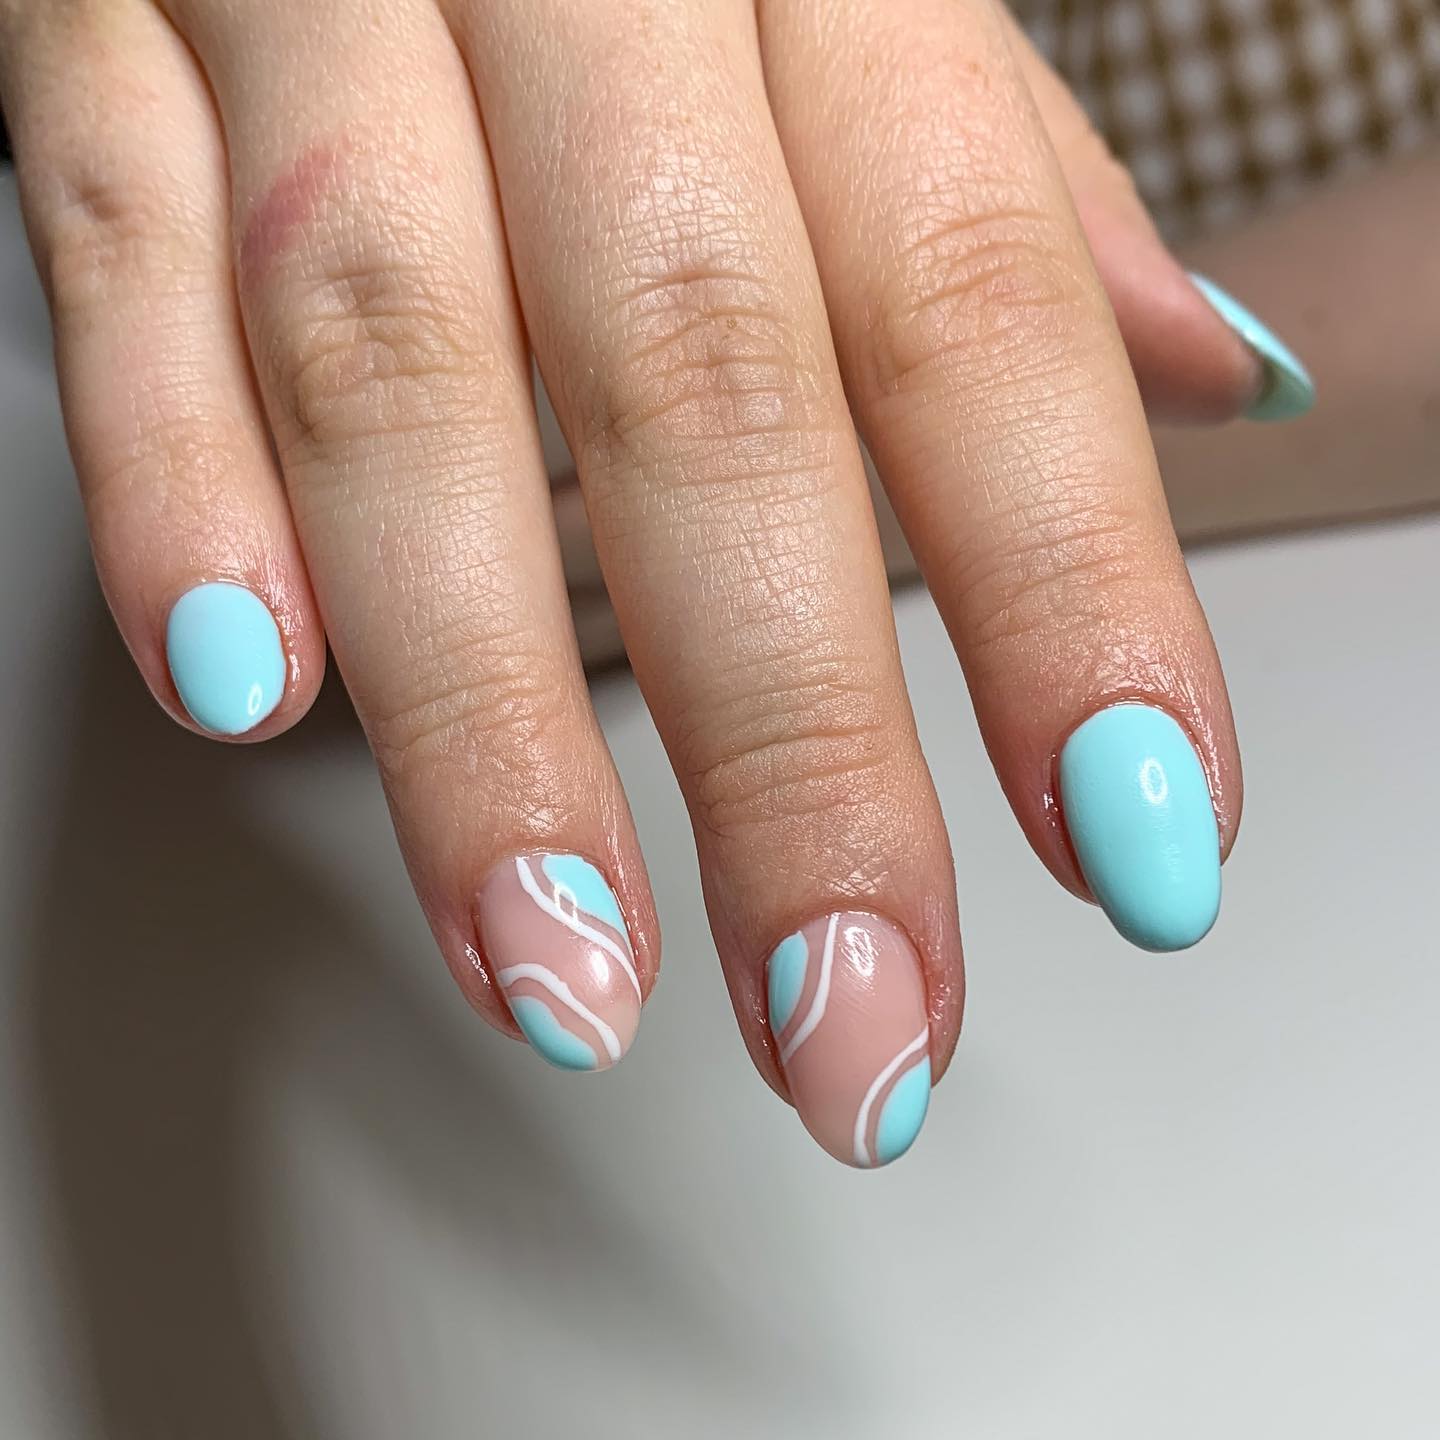 Here is another idea for light blue nail art. Two accent nails with some white lines and blue shapes are striking.